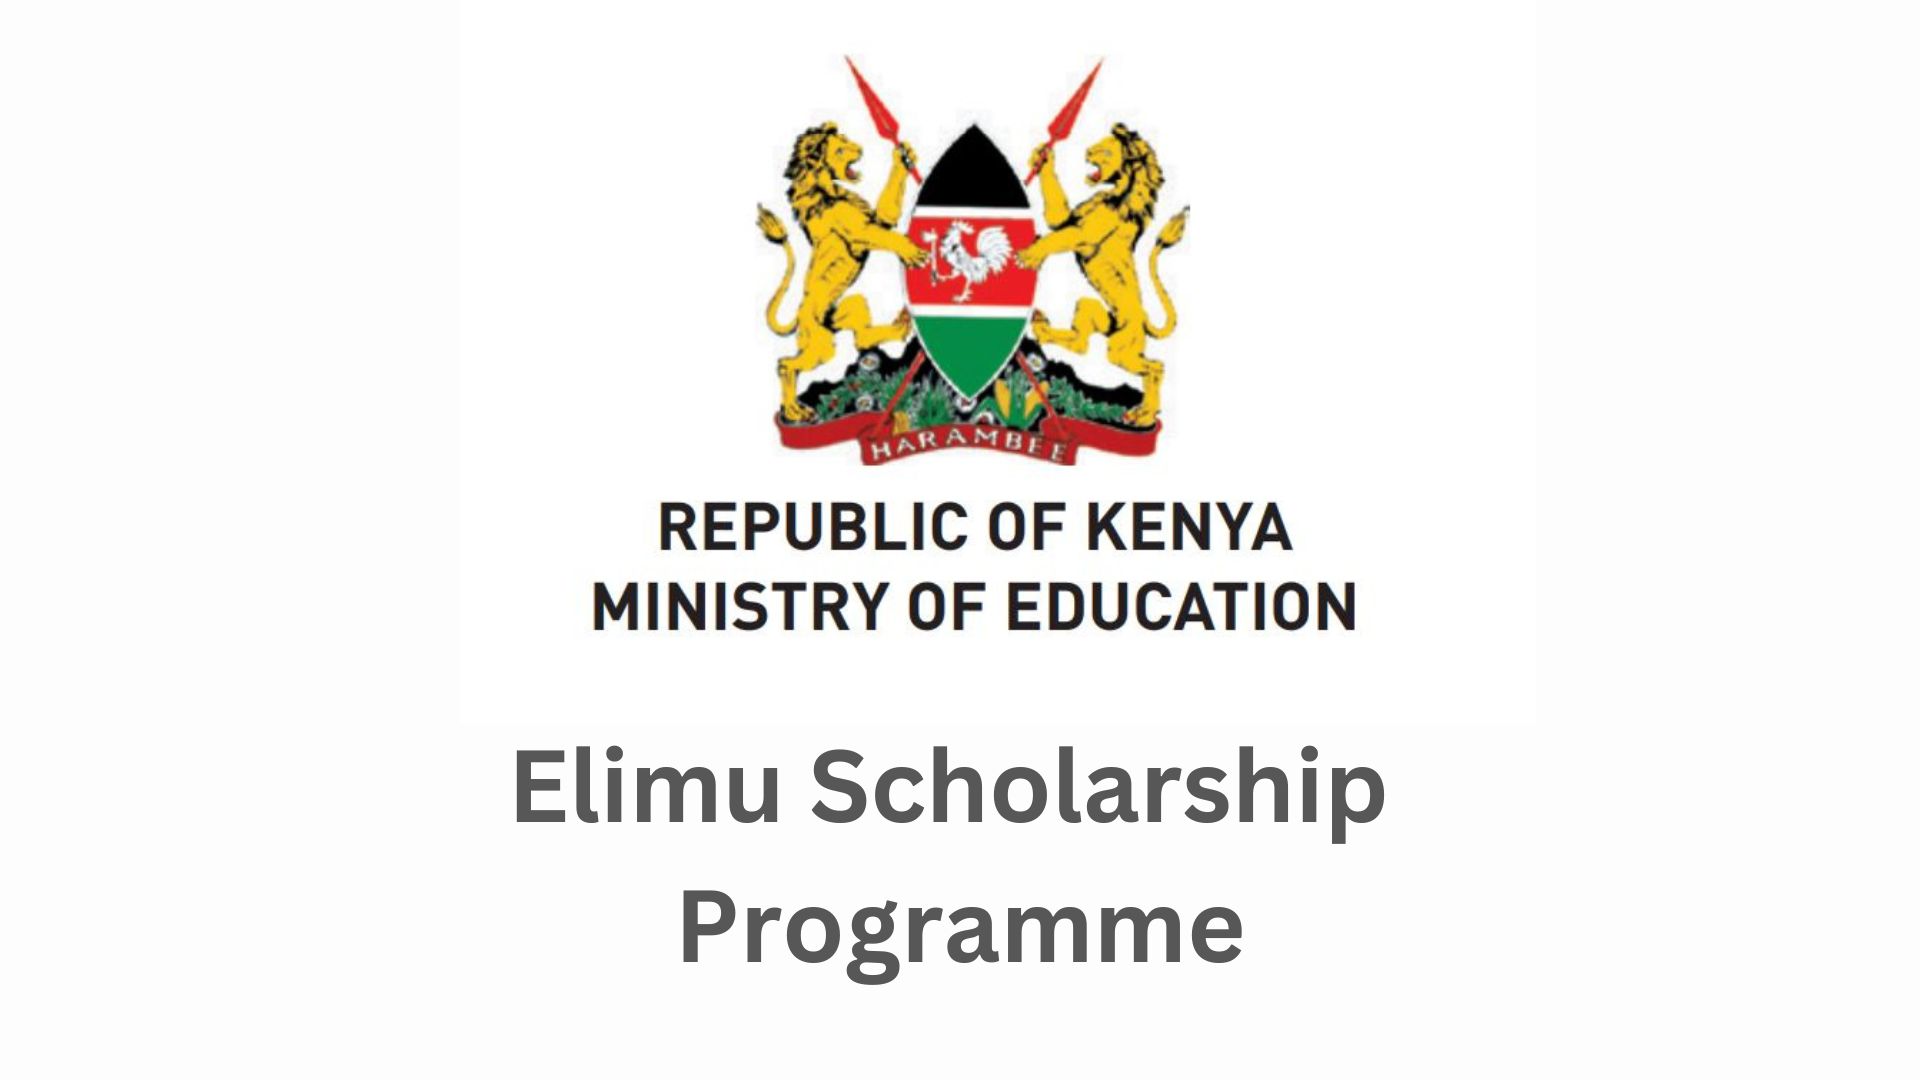 Elimu Scholarship Program to Cater for 9,000 Needy Students